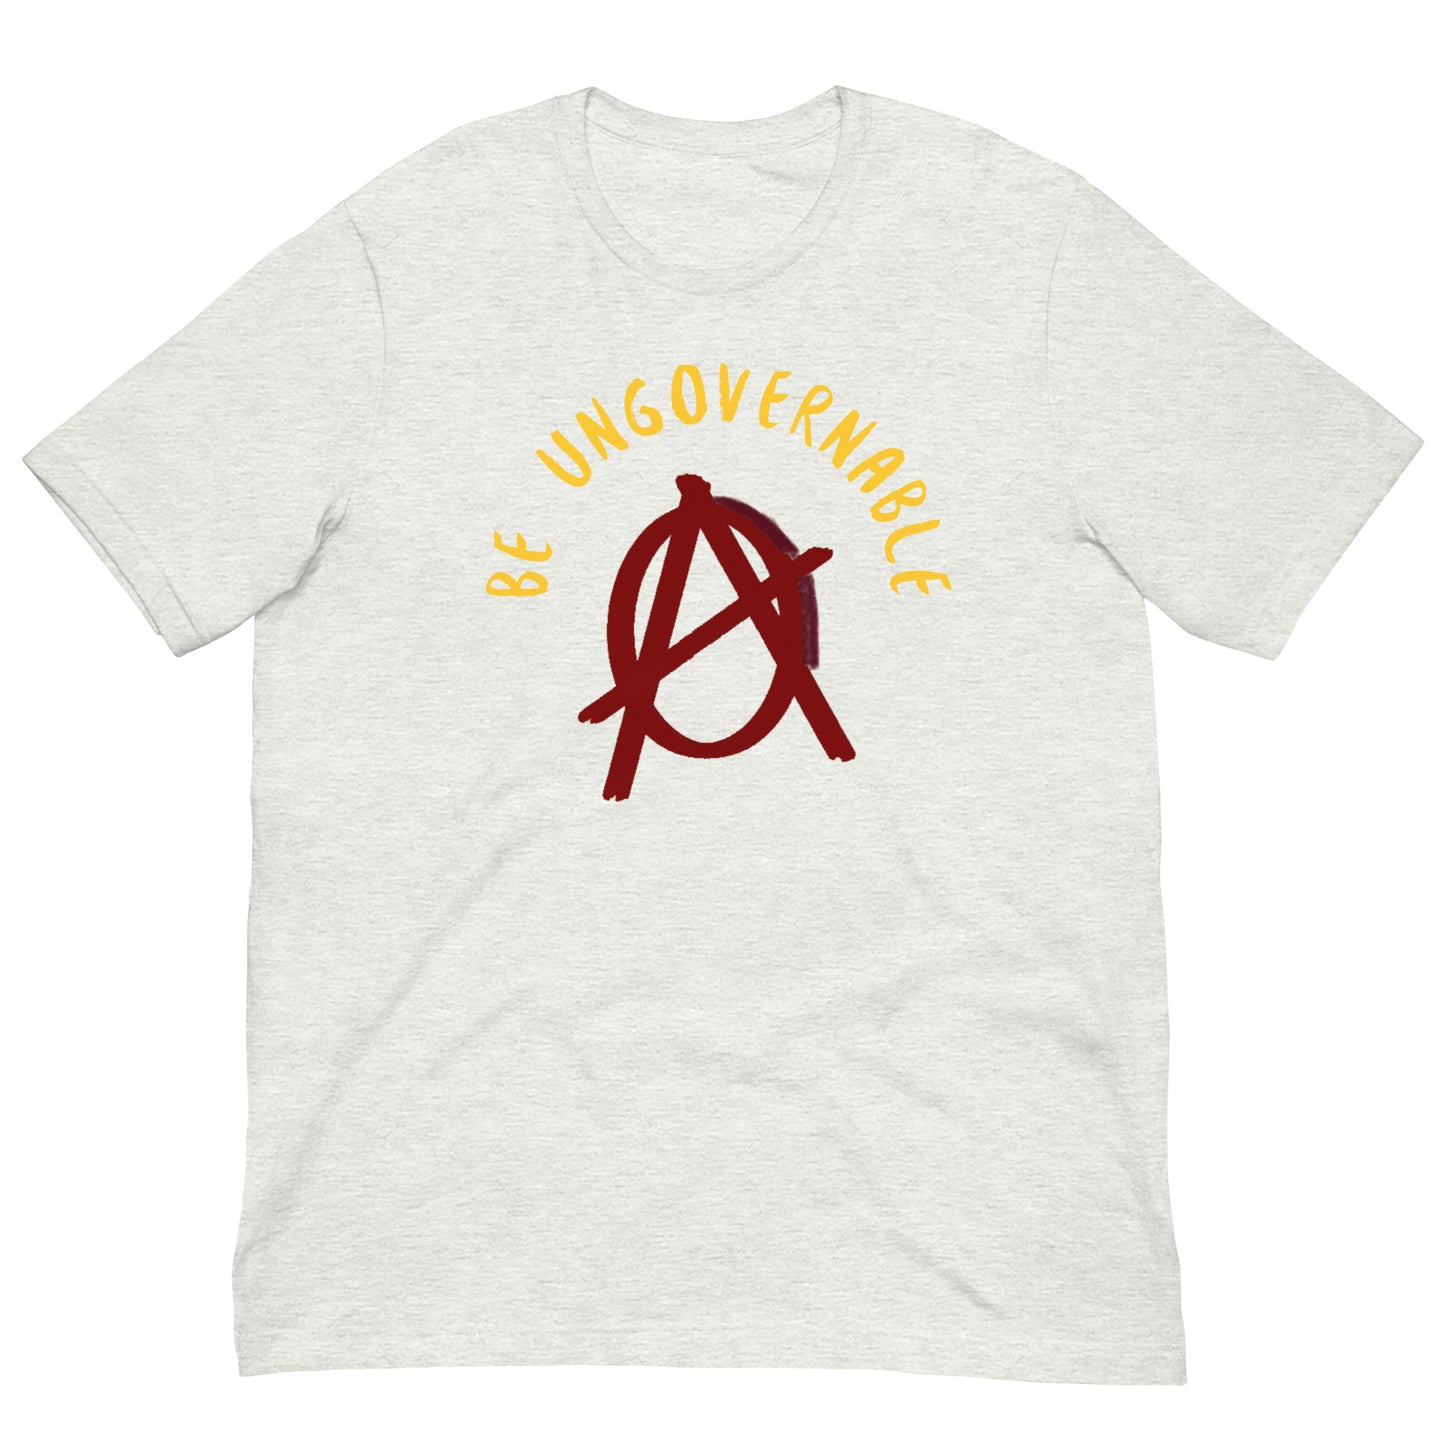 Anarchy Wear "Be Ungovernable" Red Pastels Unisex t-shirt